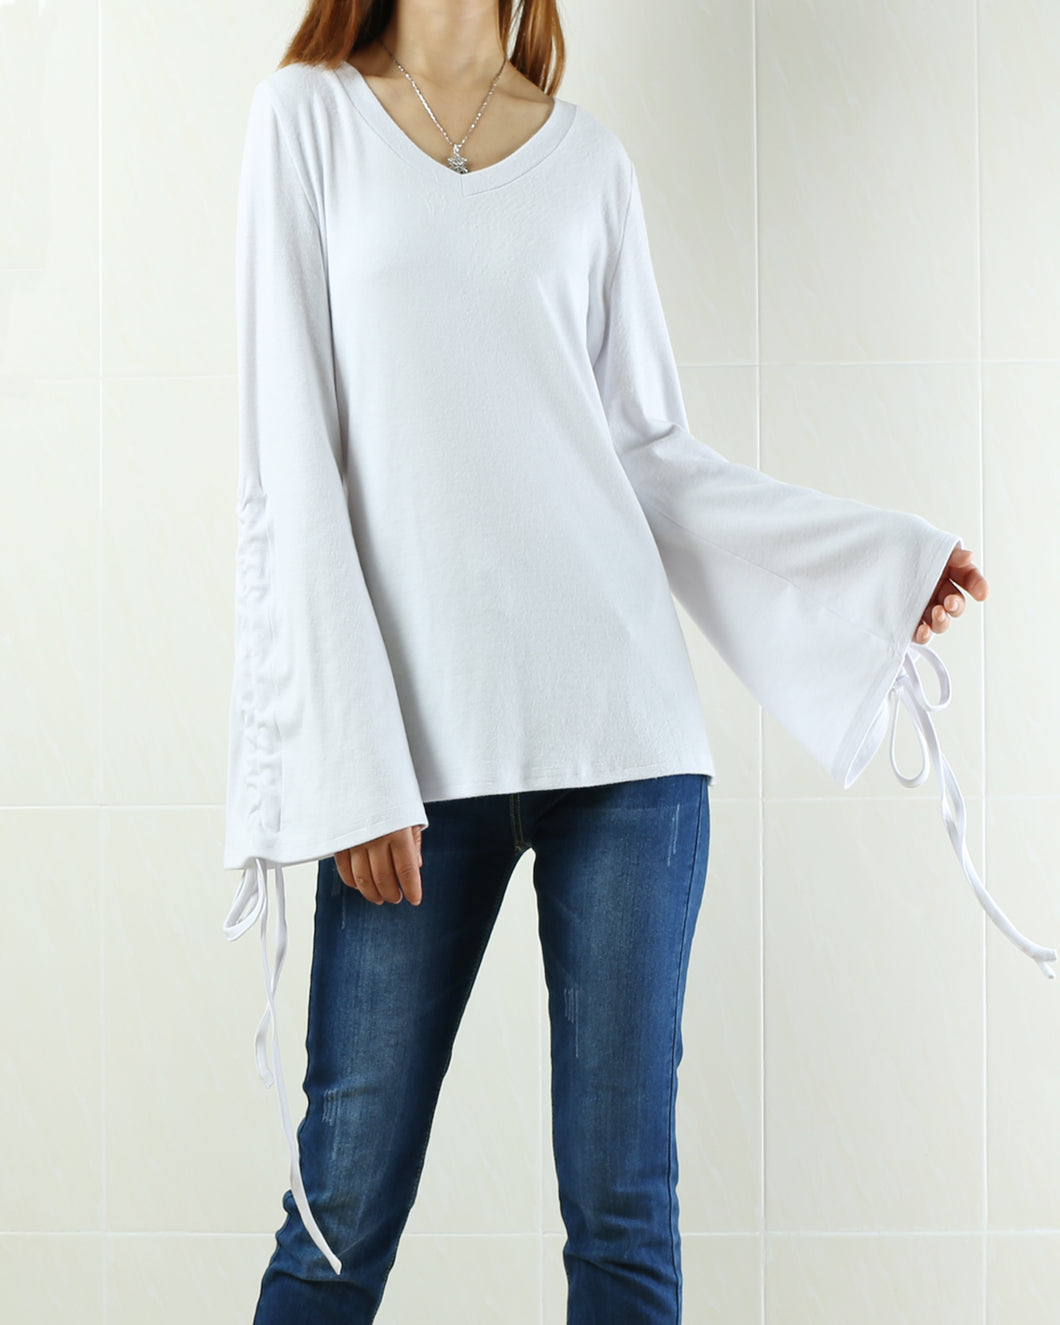 Women's bell sleeve bottoming top/cotton t-shirt/plus size oversized casual customized top(Y1830) - lijingshop